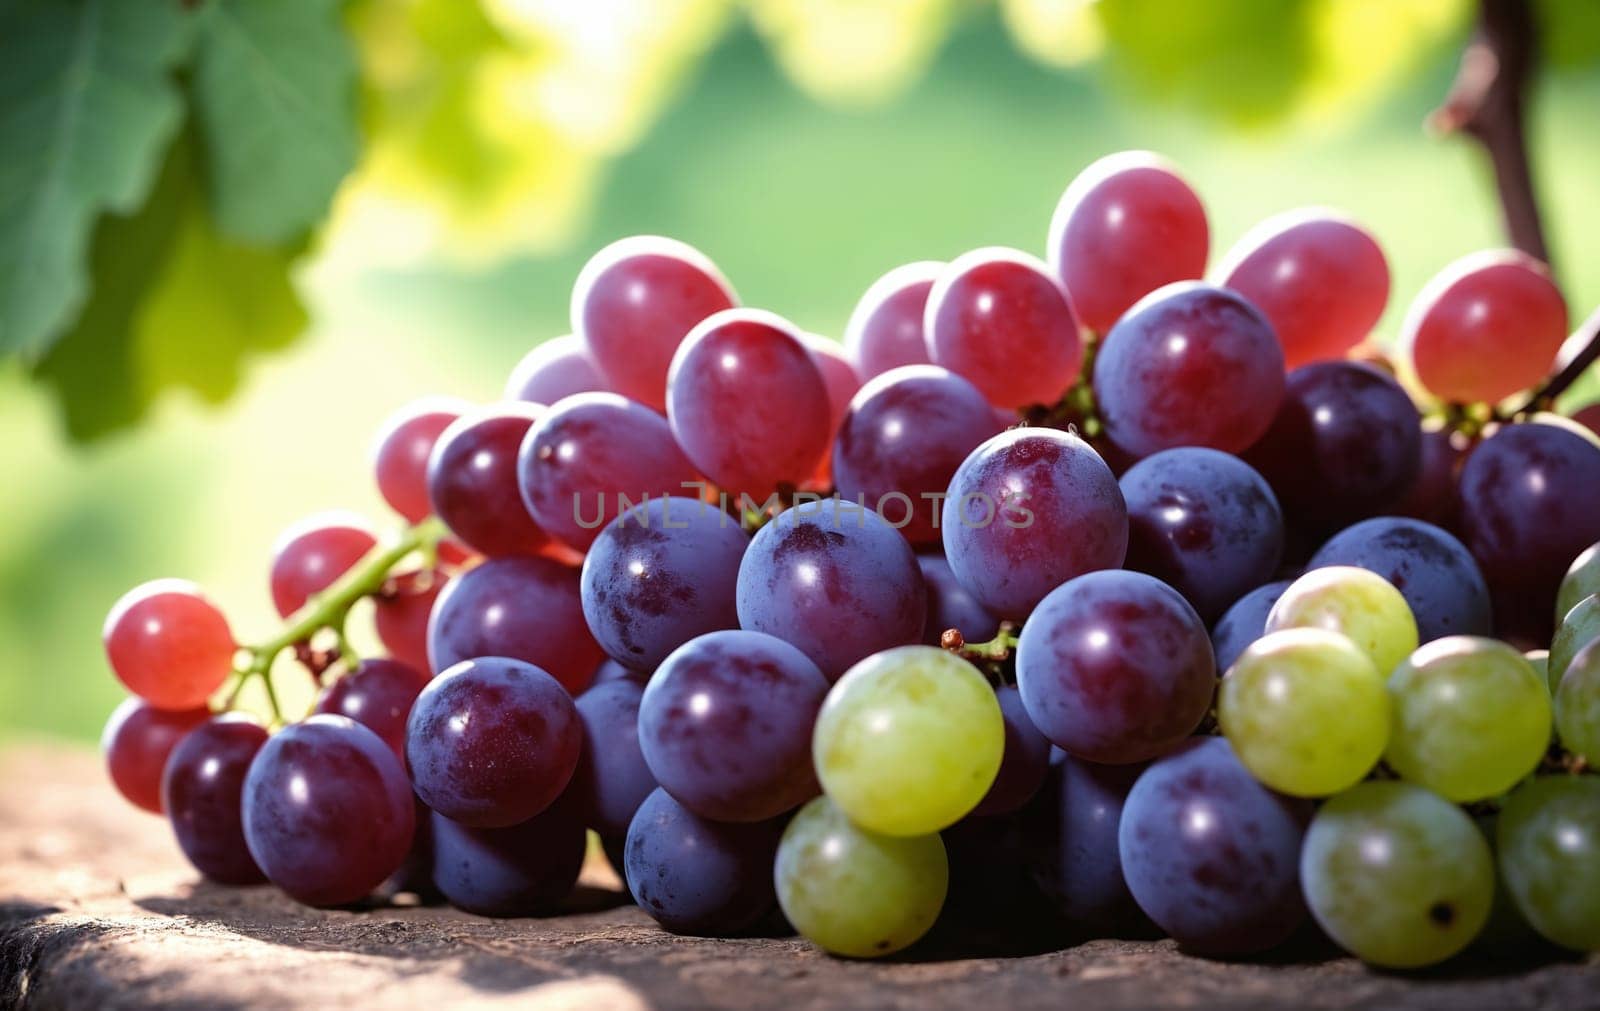 Bunch of grapes in vineyard, close-up. Nature background by Andre1ns